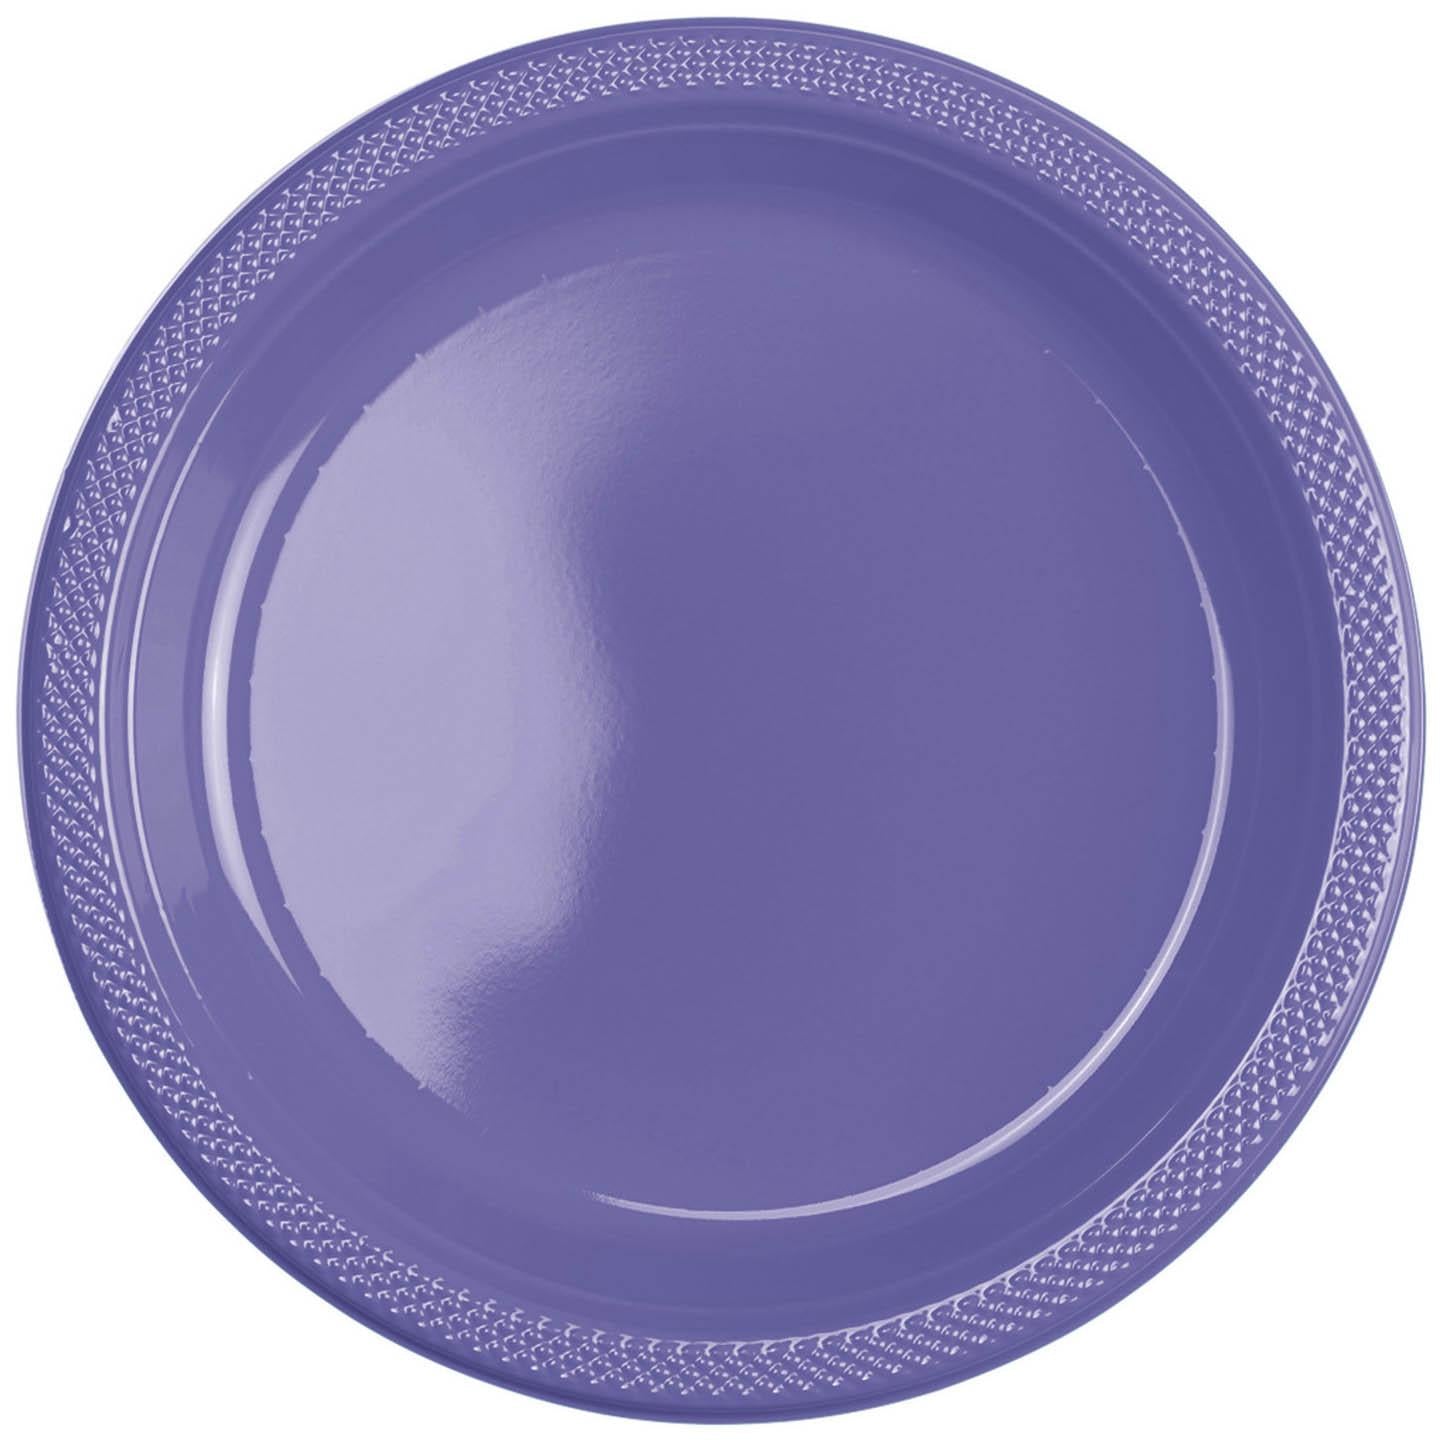 New Purple Plastic Plates 10in, 20pcs Solid Tableware - Party Centre